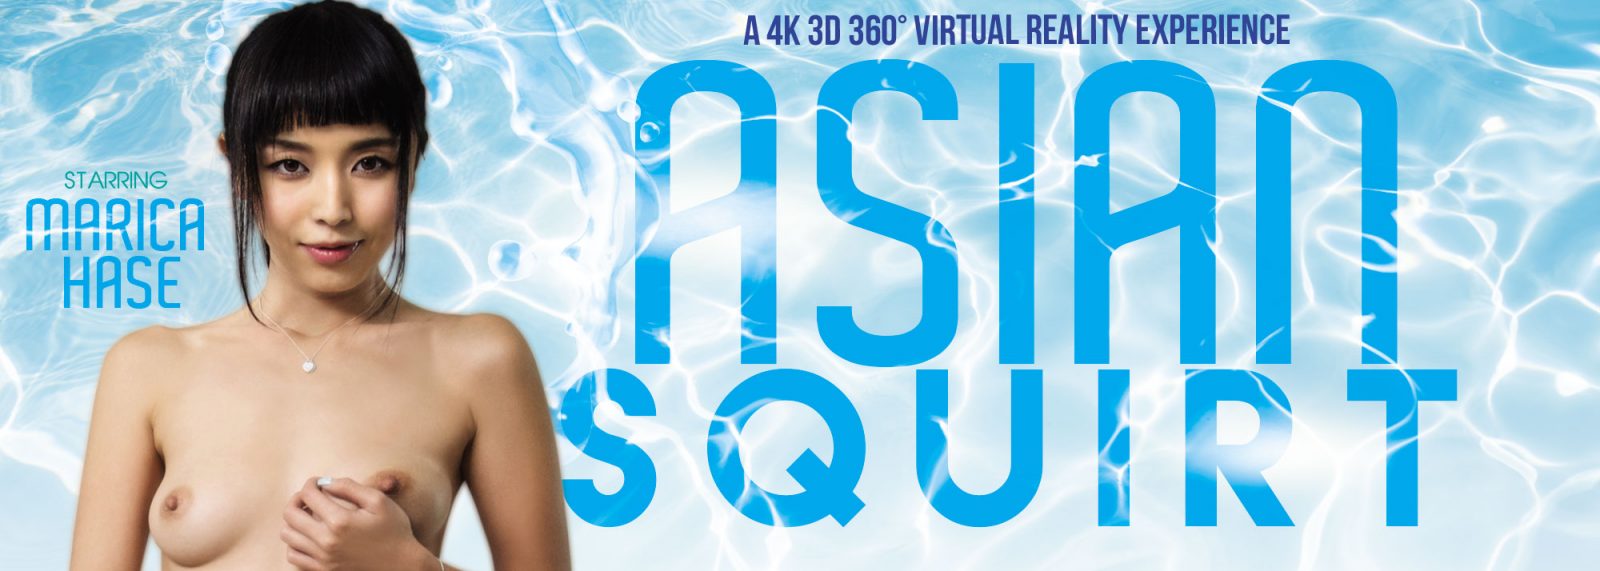 Asian Squirt - VR Porn Video, Starring: Marica Hase